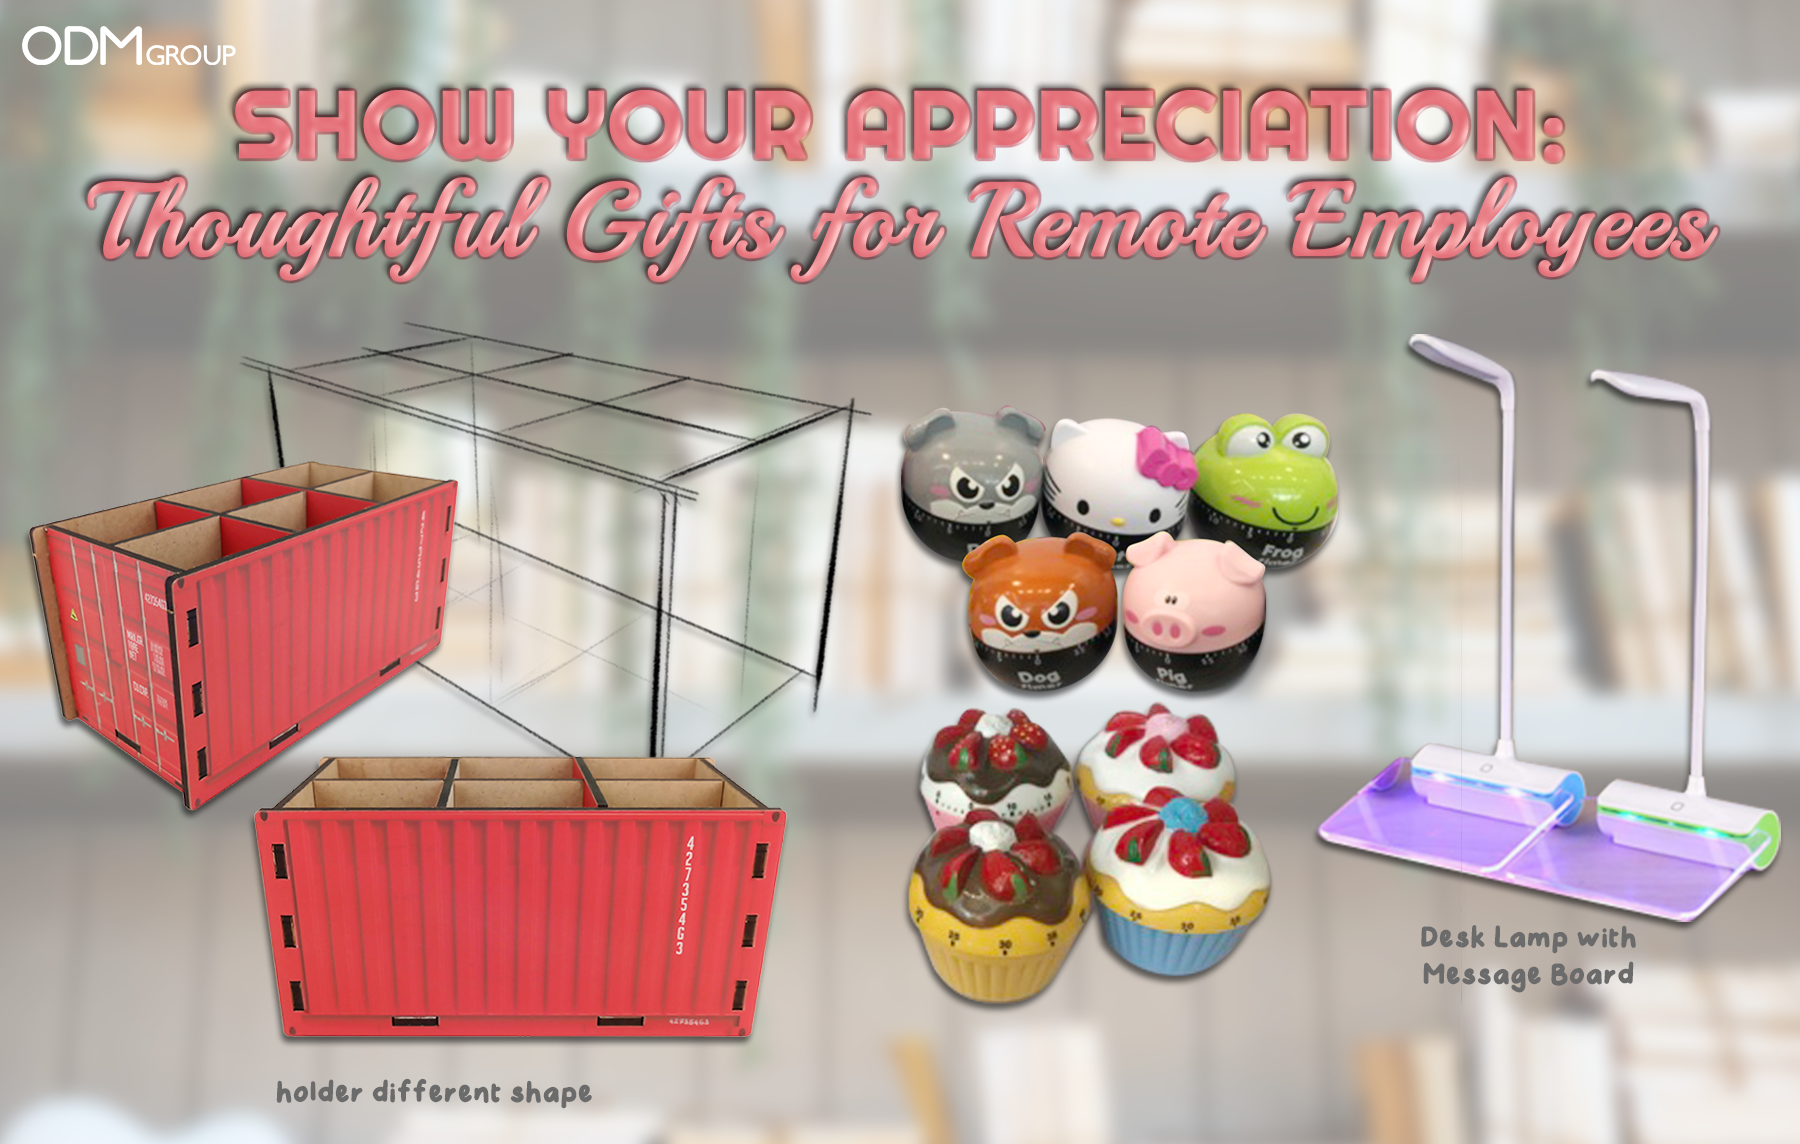 Tips on how to improve morale at work with stress balls, gift boxes, and other creative items.